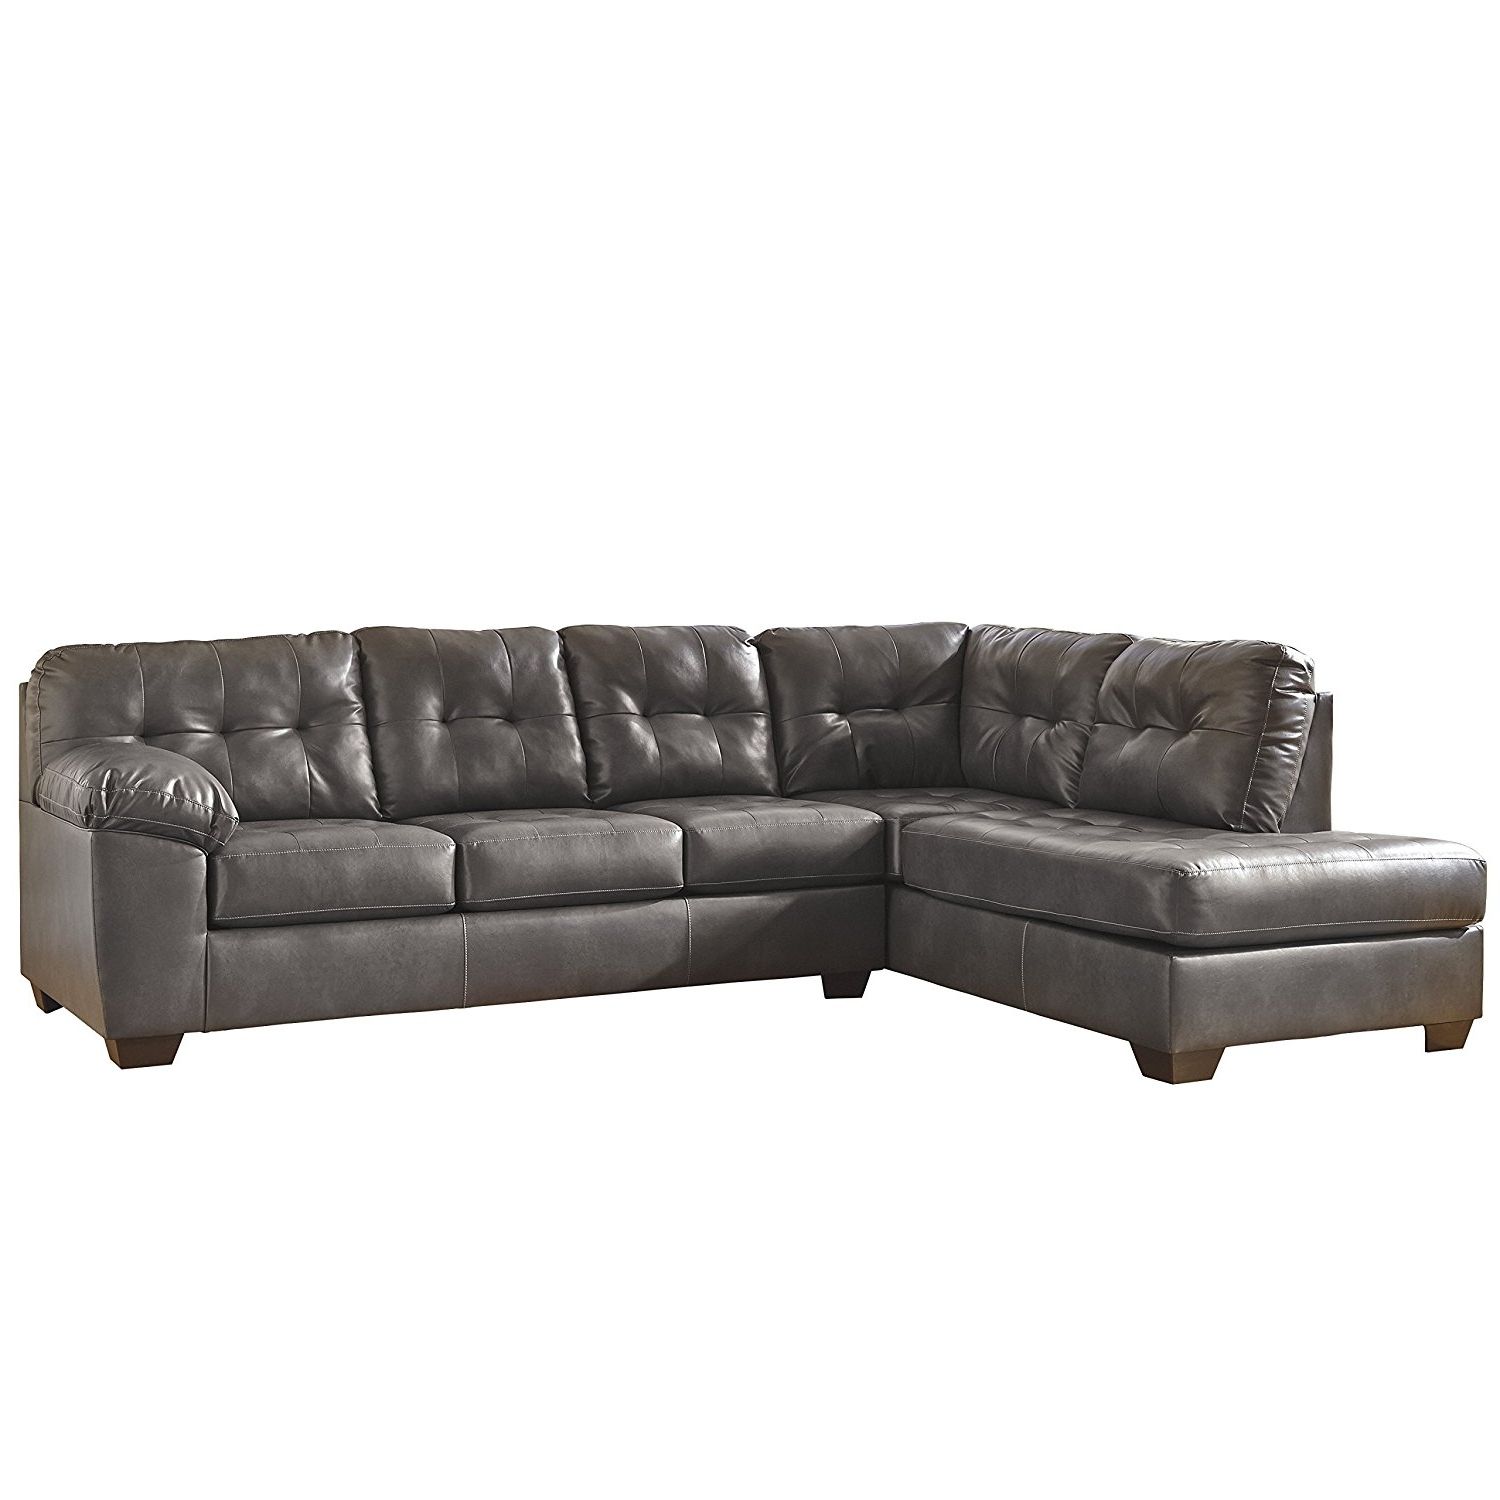 Left Facing Chaise Sectionals For Most Popular Amazon: Flash Furniture Signature Designashley Alliston (View 9 of 15)